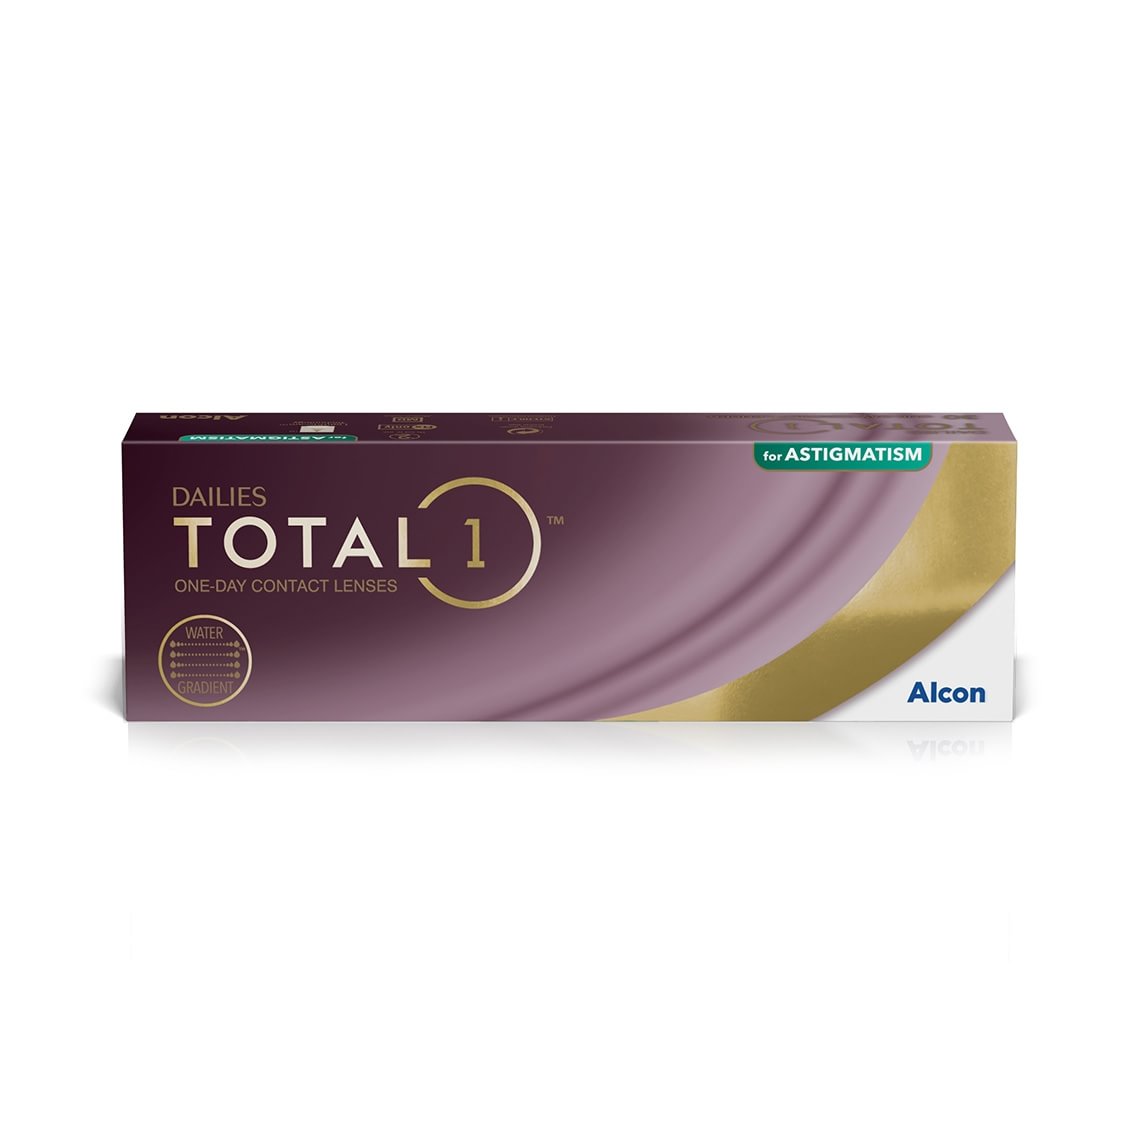 DAILIES Total 1 For Astigmatism 30 st/box